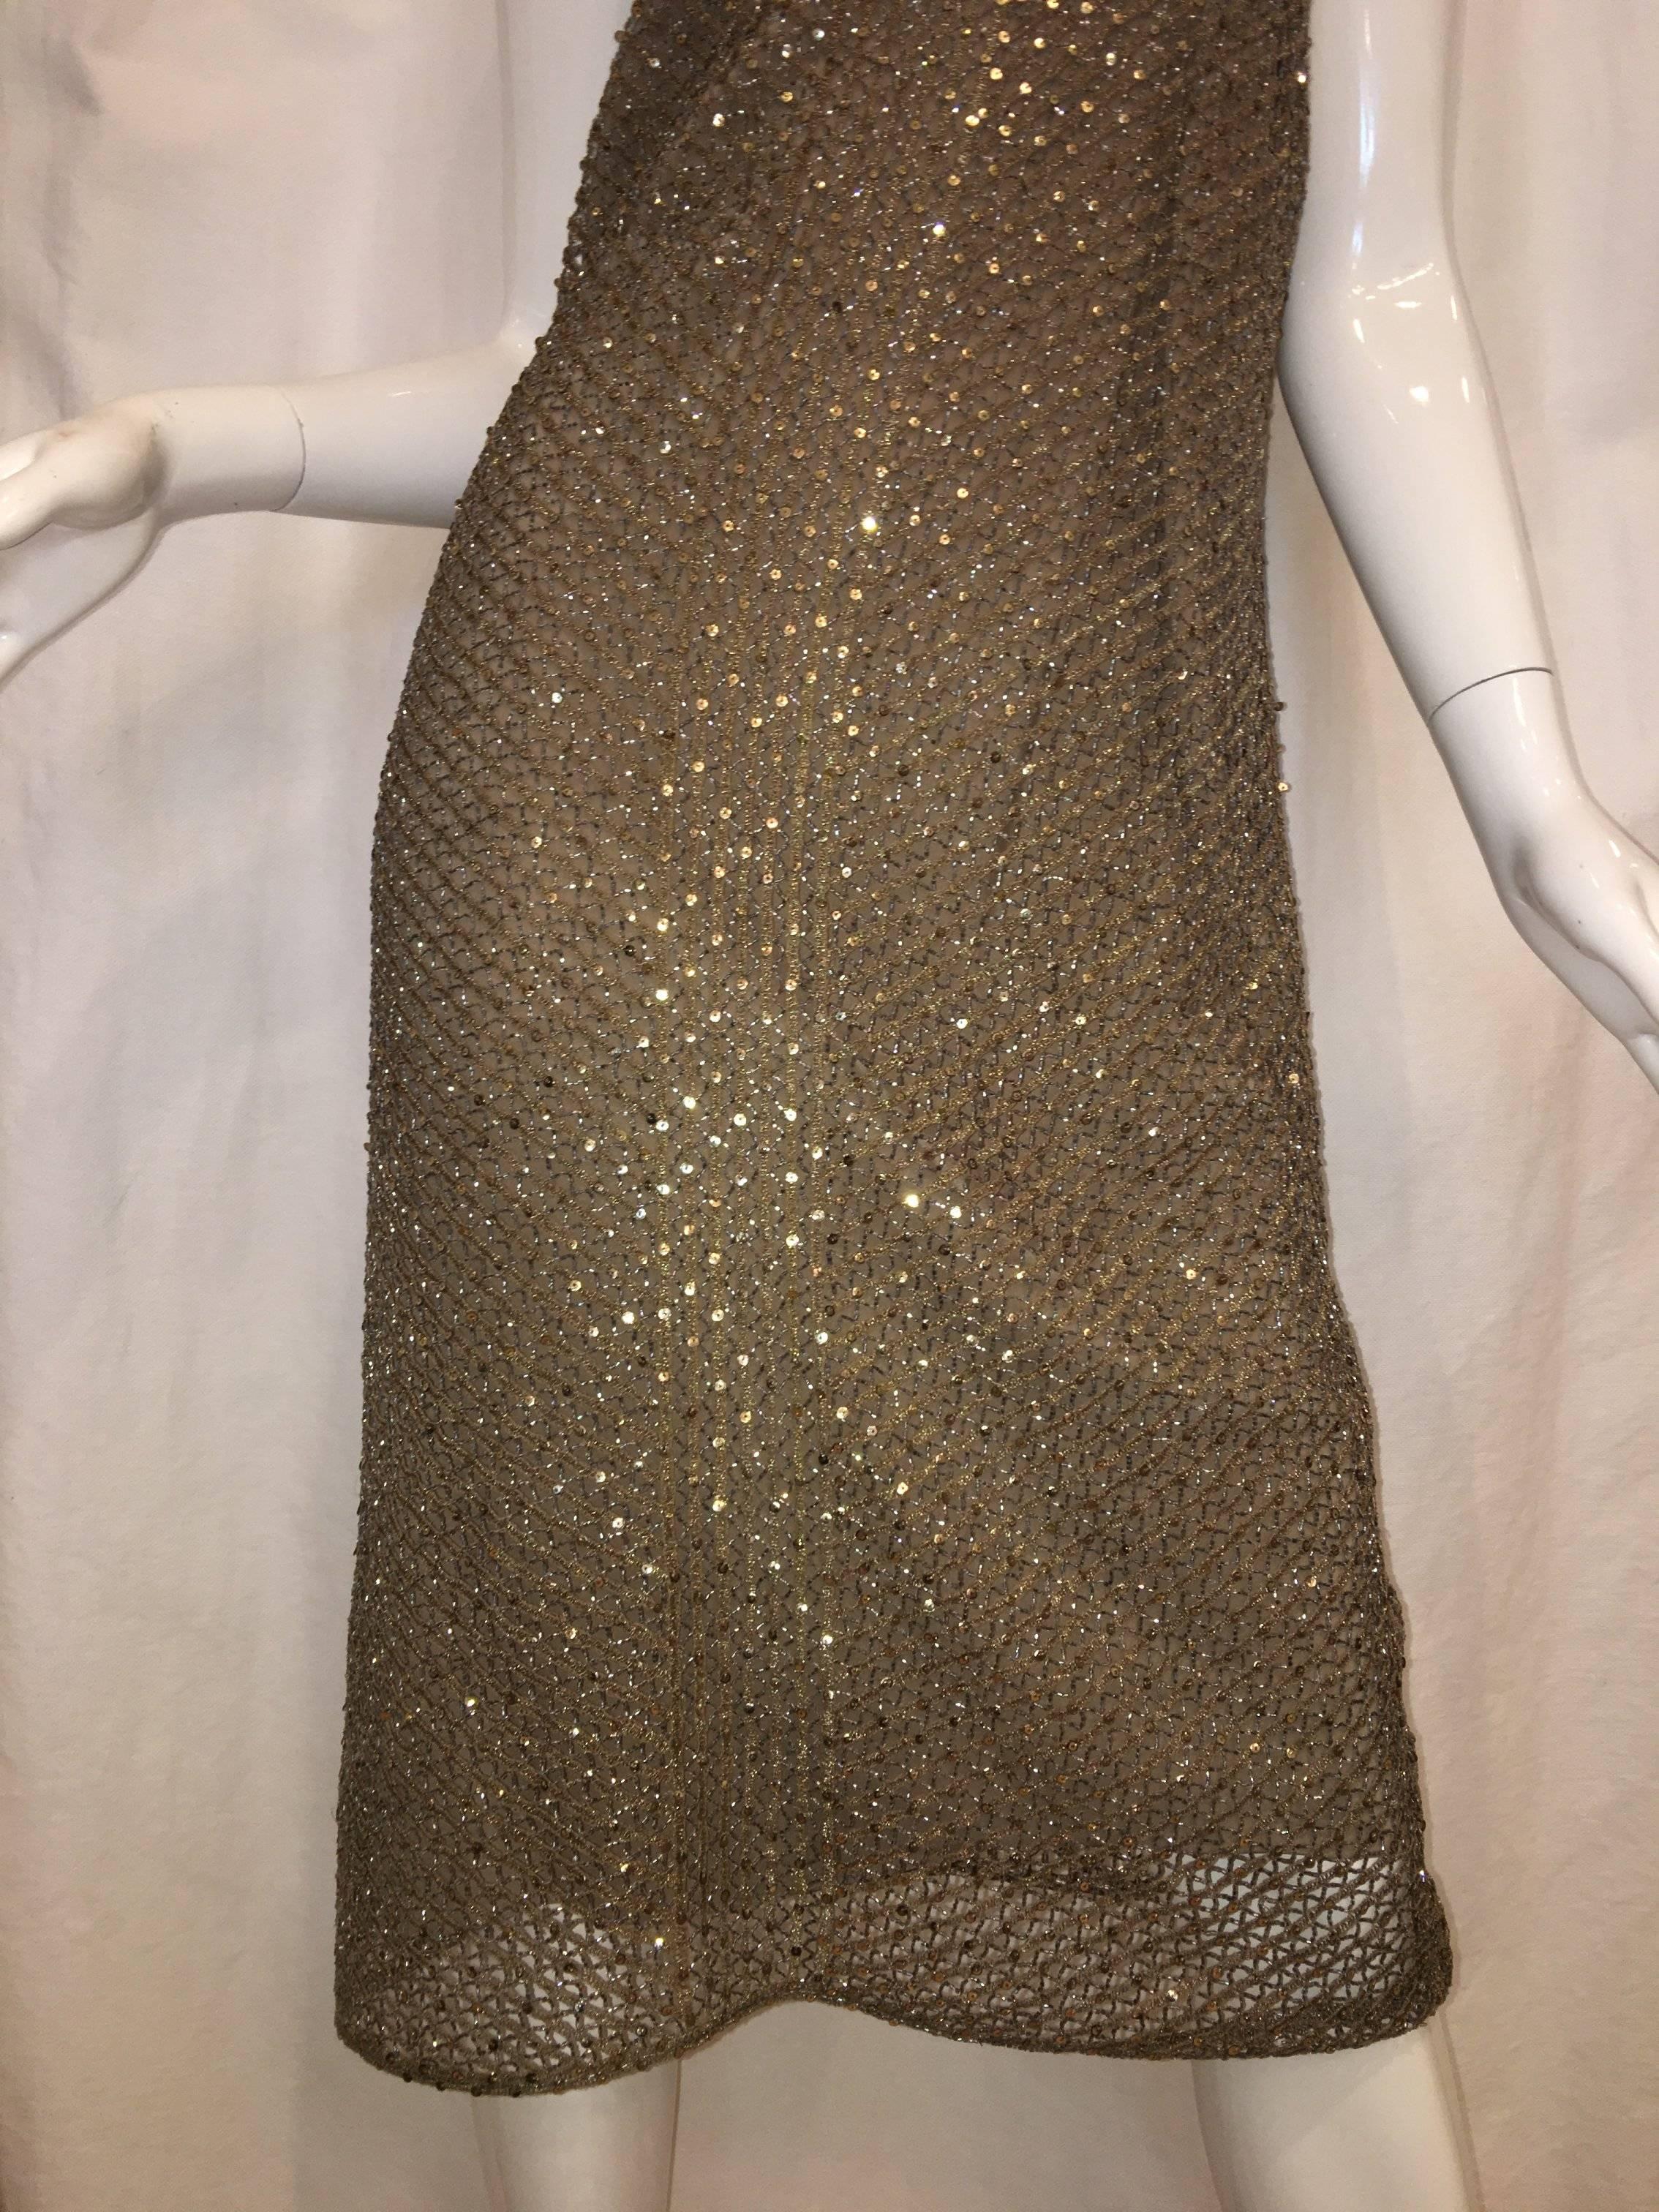 Ralph Lauren Gold Sequin with Knit Overlay Dress. Spaghetti Strap with Low cut Back. 